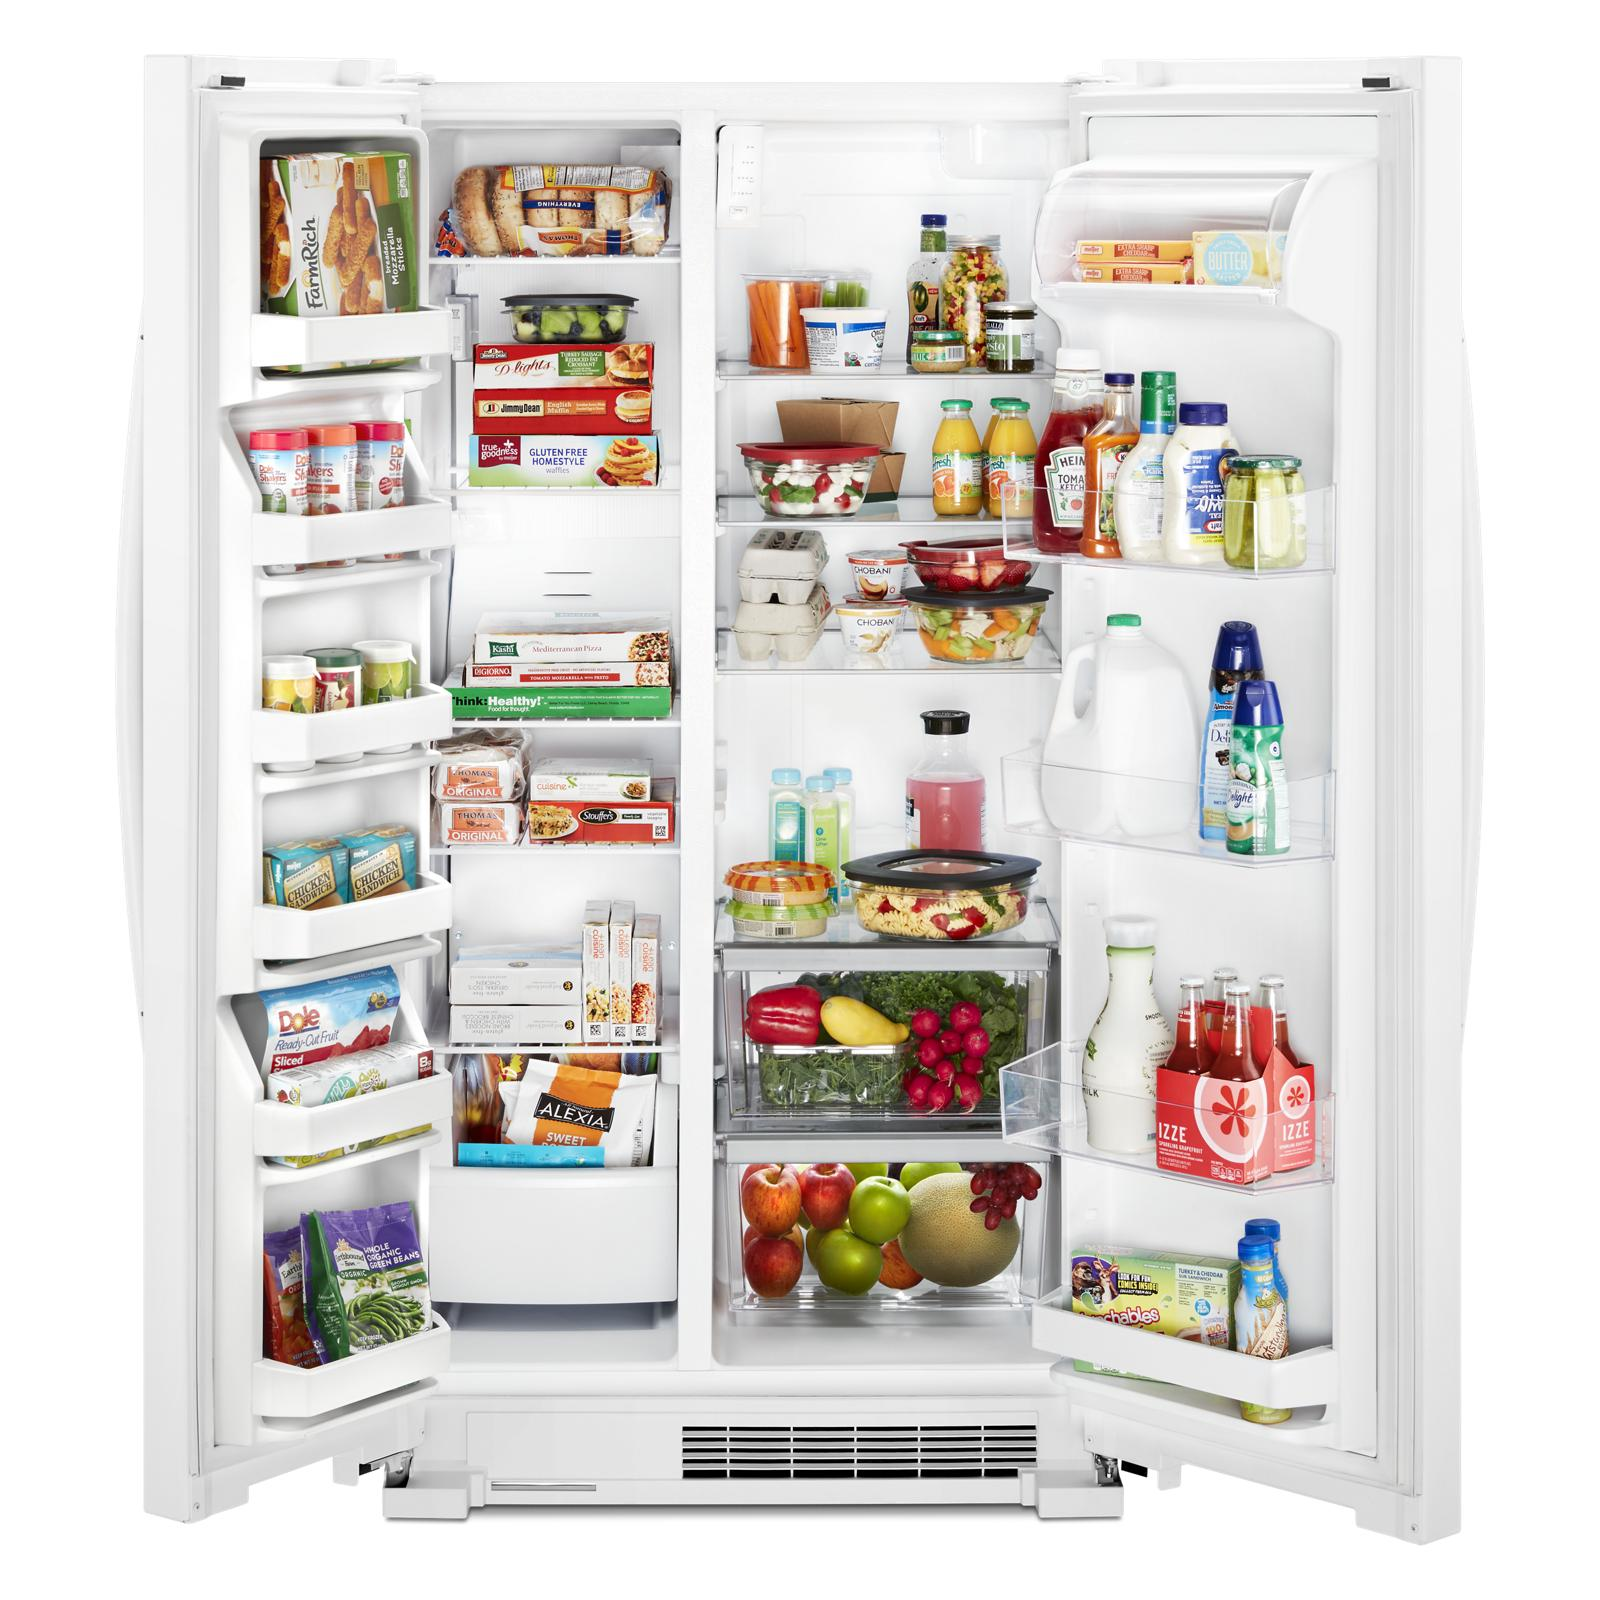 Whirlpool - 35.875 Inch 25 cu. ft Side by Side Refrigerator in White - WRS315SNHW